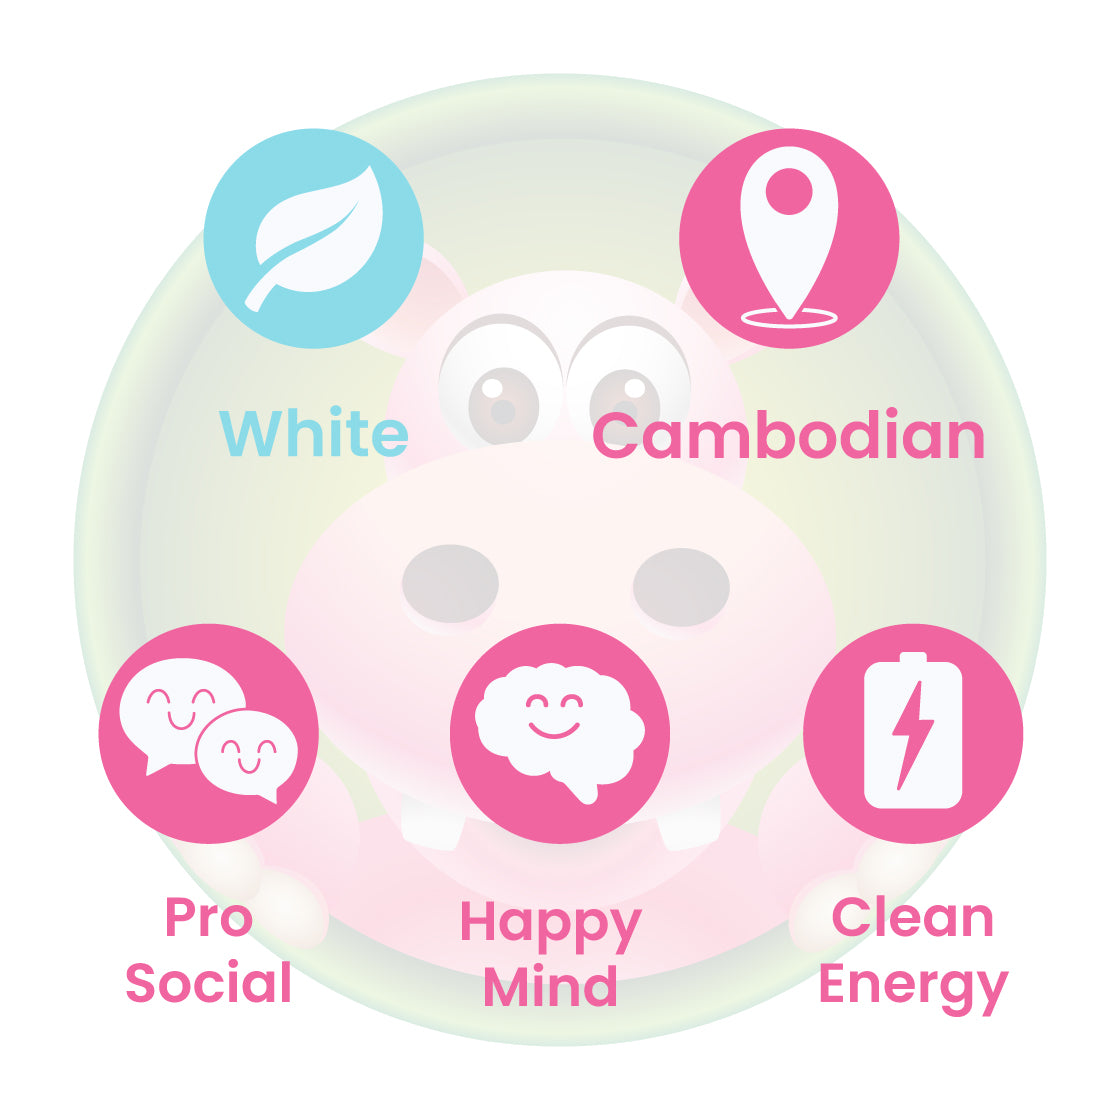 Infographic Details for Happy Hippo Blended White Vein Cambodian Kratom Powder. Leaf color: White Vein. Kratom Strain Origin: Cambodian. Kratom Effects resonate with Clean Energy, a Happy Mind, and an energized pro-social outlook!